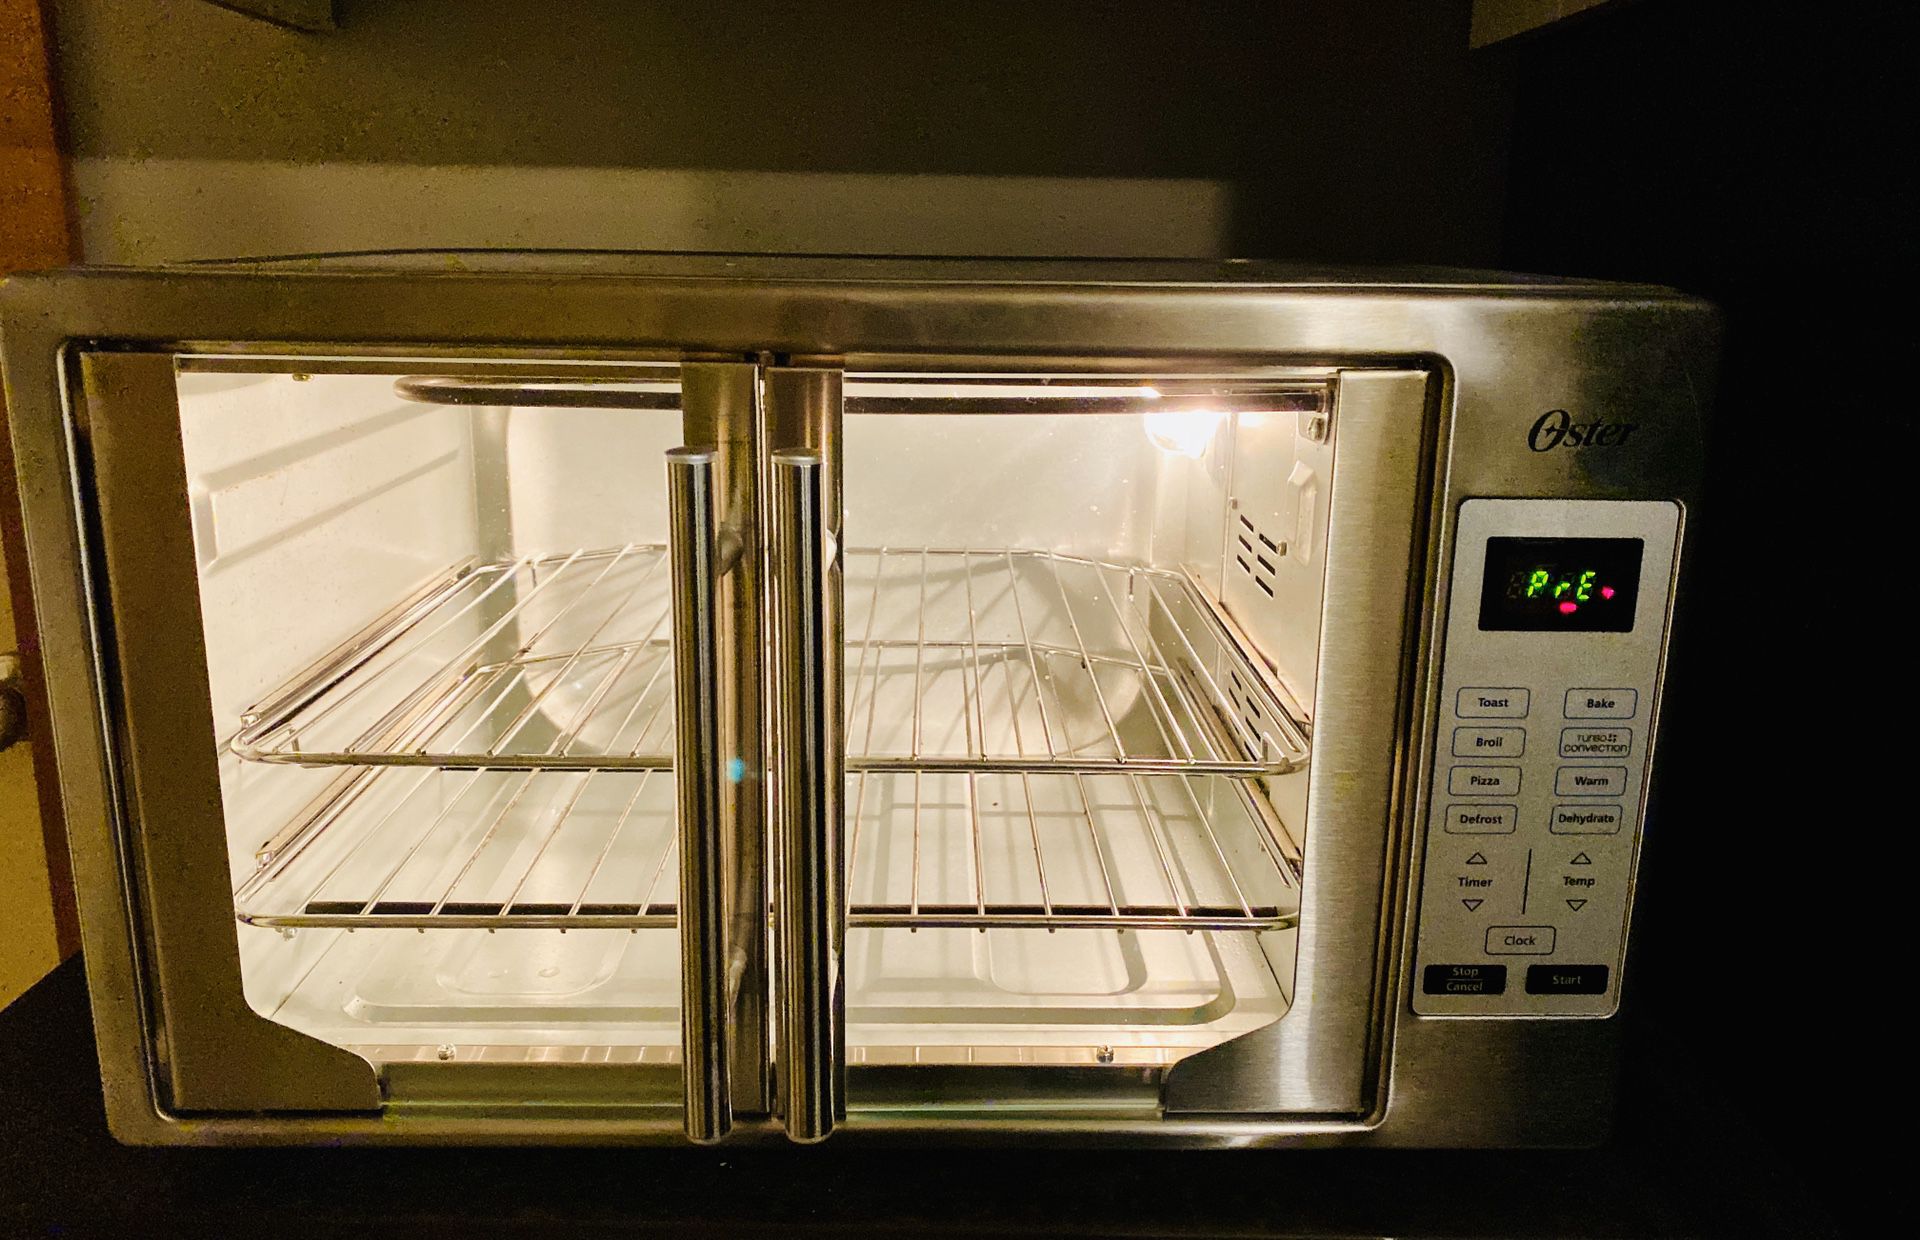 Oster French Door Convection Oven